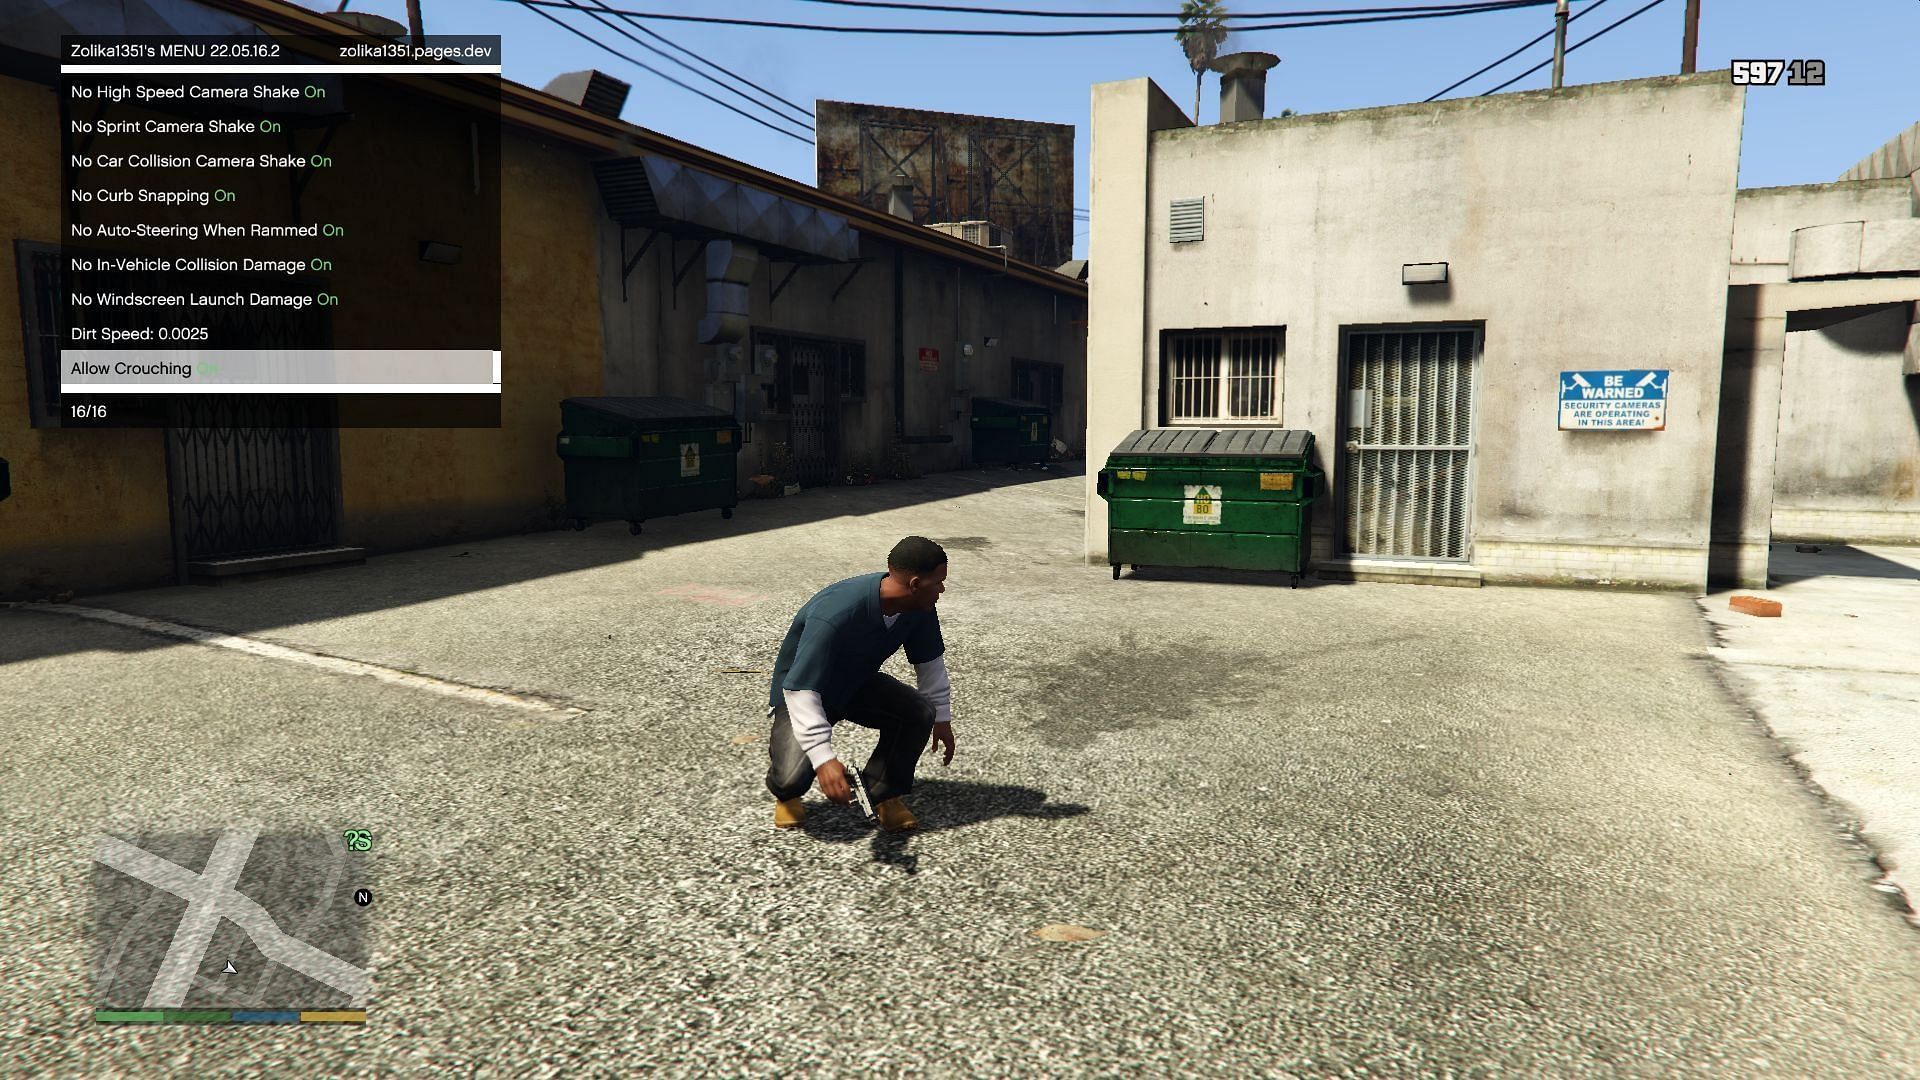 Some gamers resort to using mods to make themselves crouch in Grand Theft Auto V (Image via GTA5-mods.com)